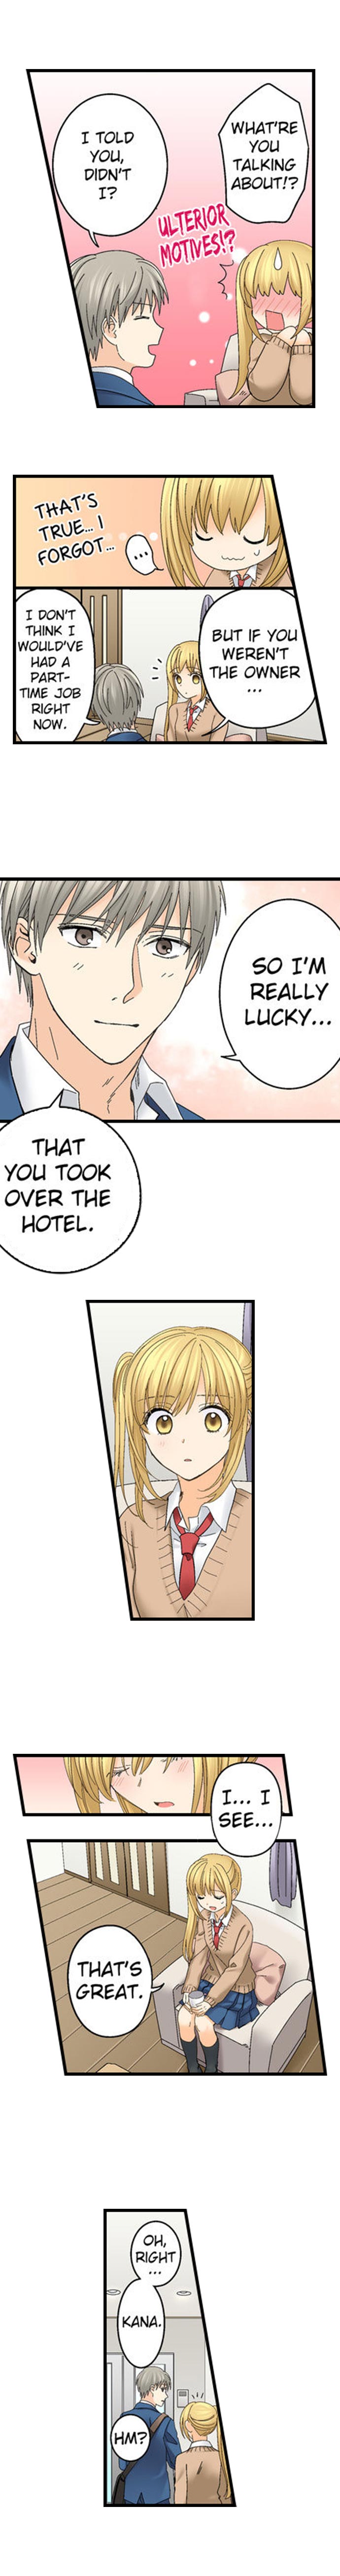 Running a Love Hotel with My Math Teacher - Chapter 62 Page 9